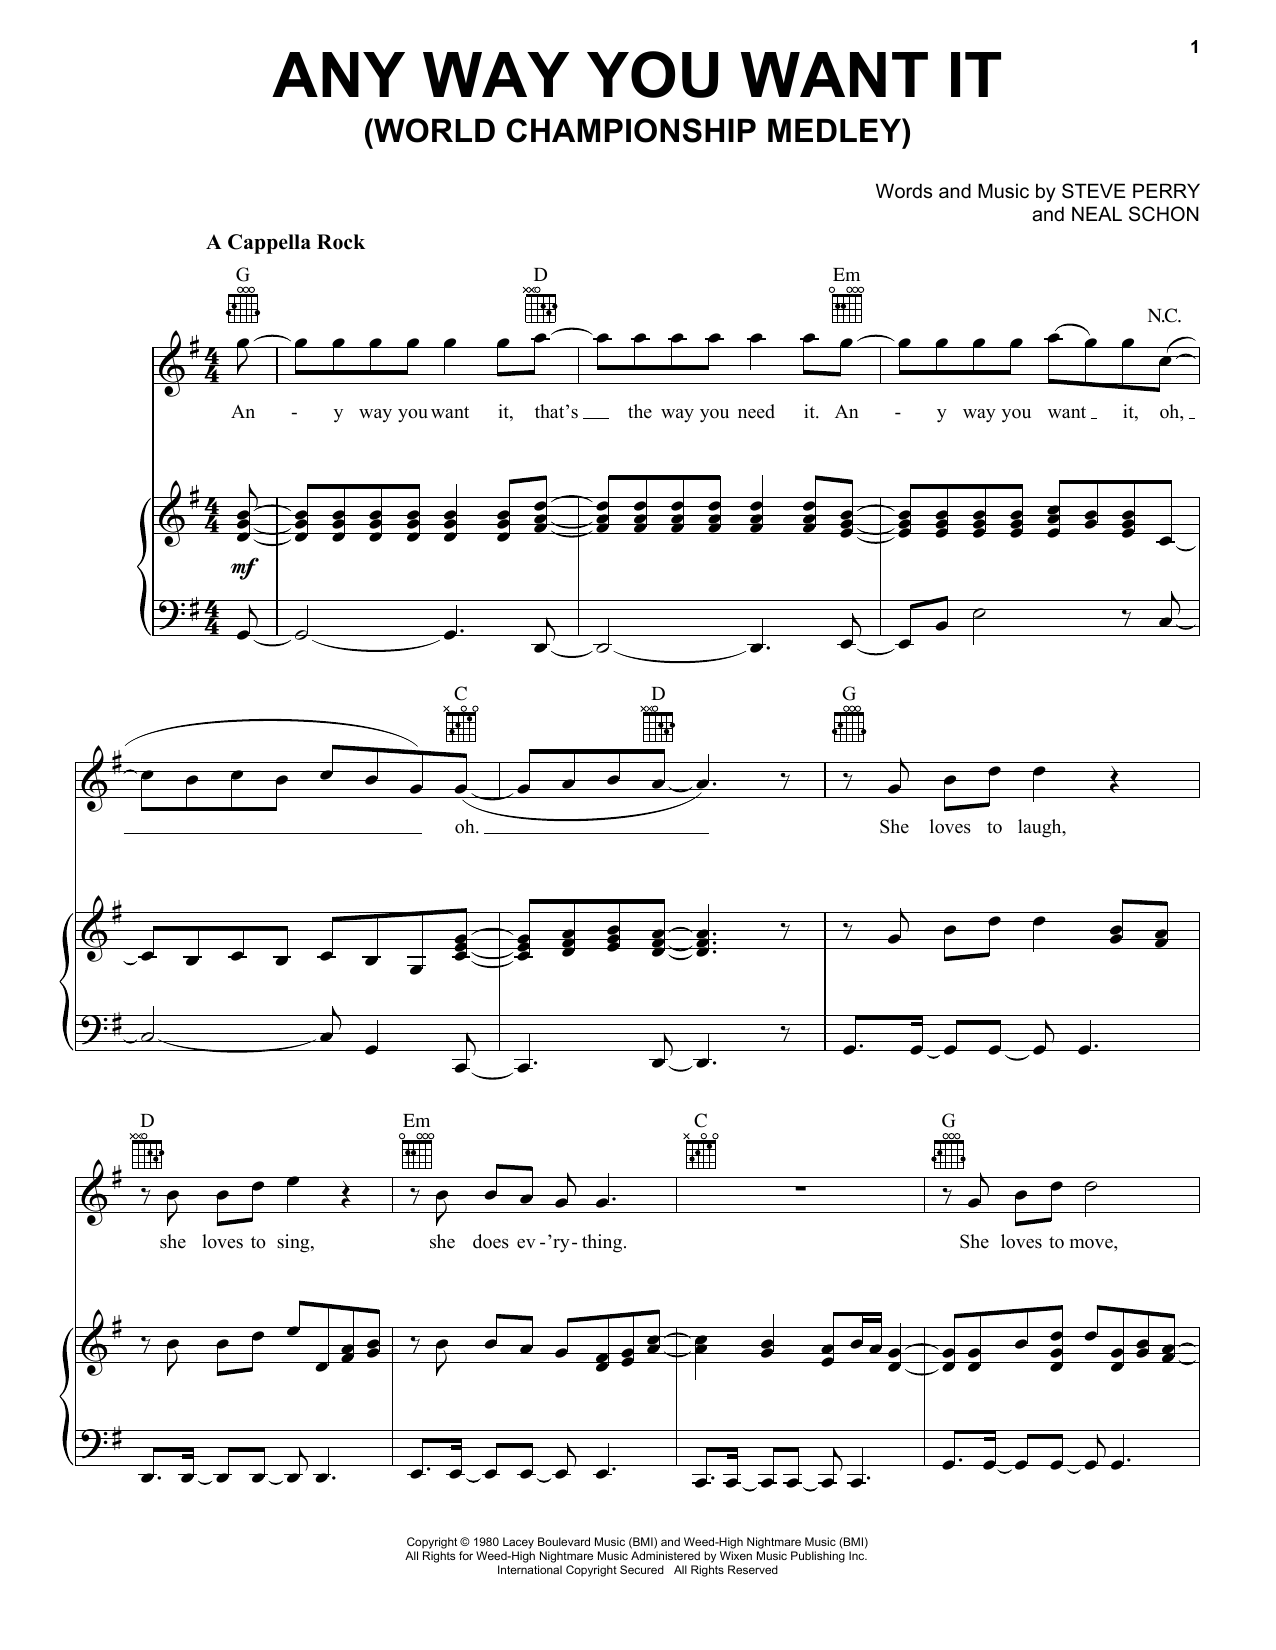 Download Journey Any Way You Want It Sheet Music